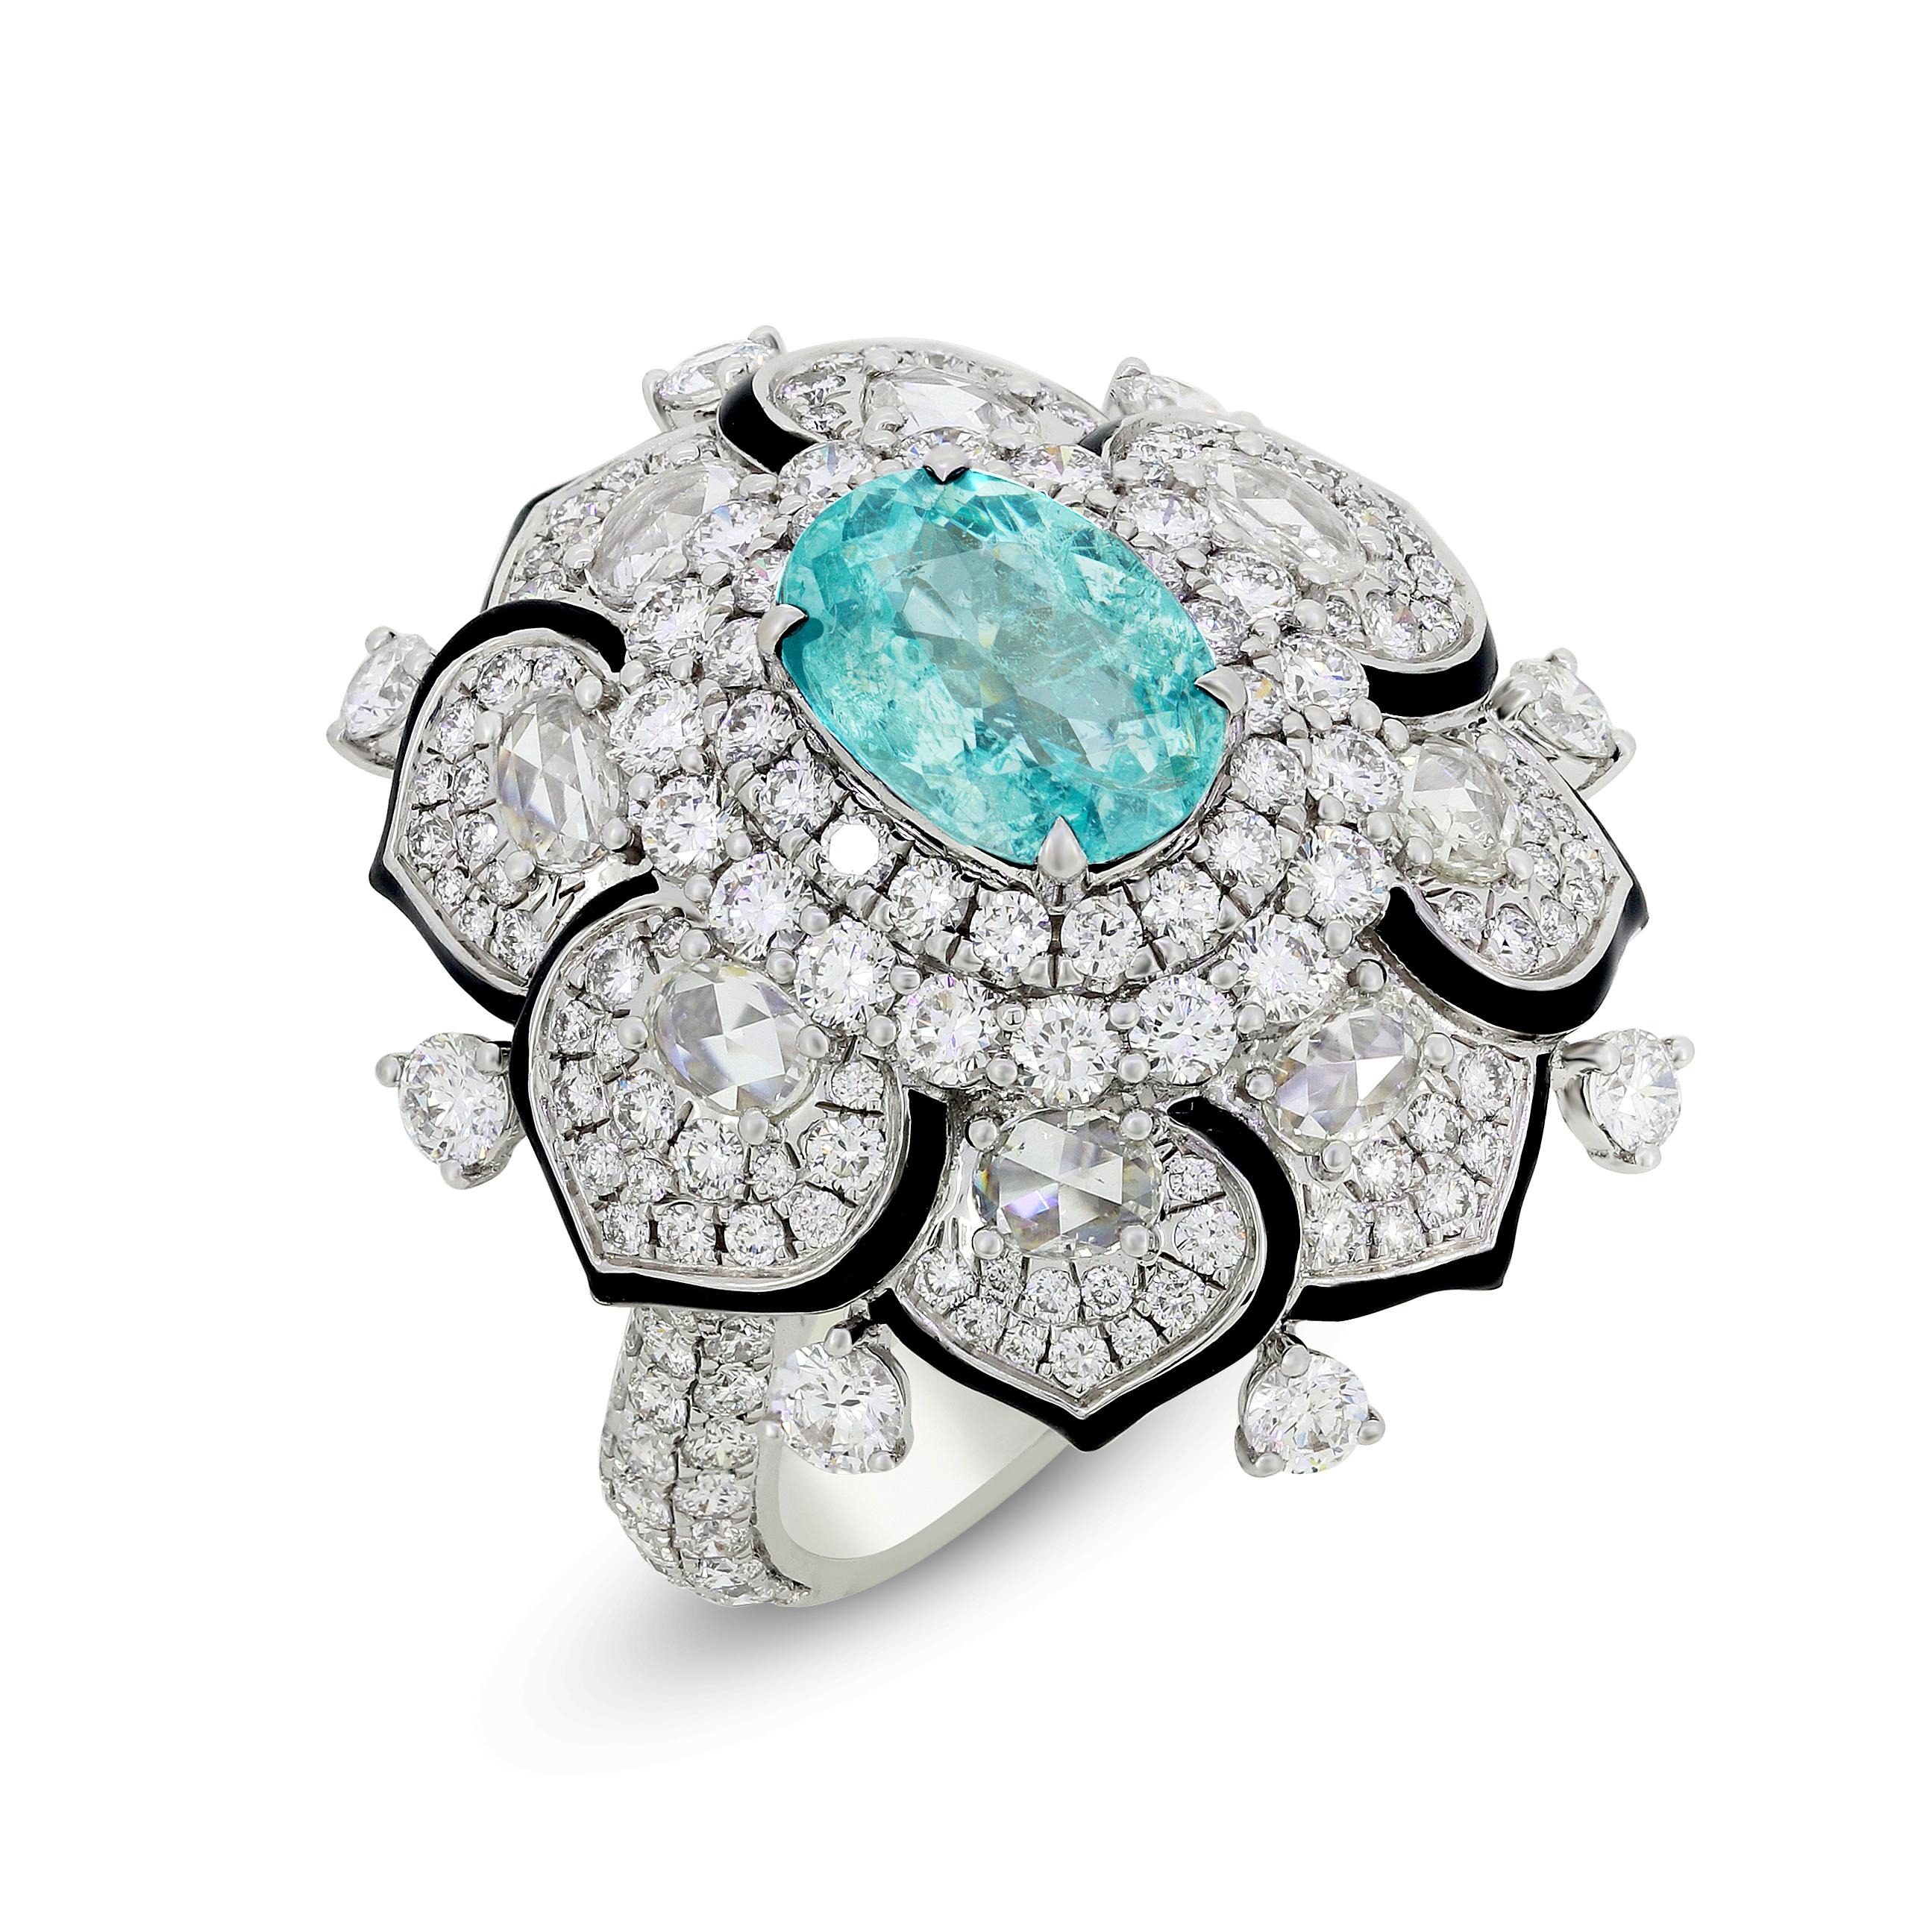 Crafted in 18k white gold this Paraiba Tourmaline  double halo diamond 